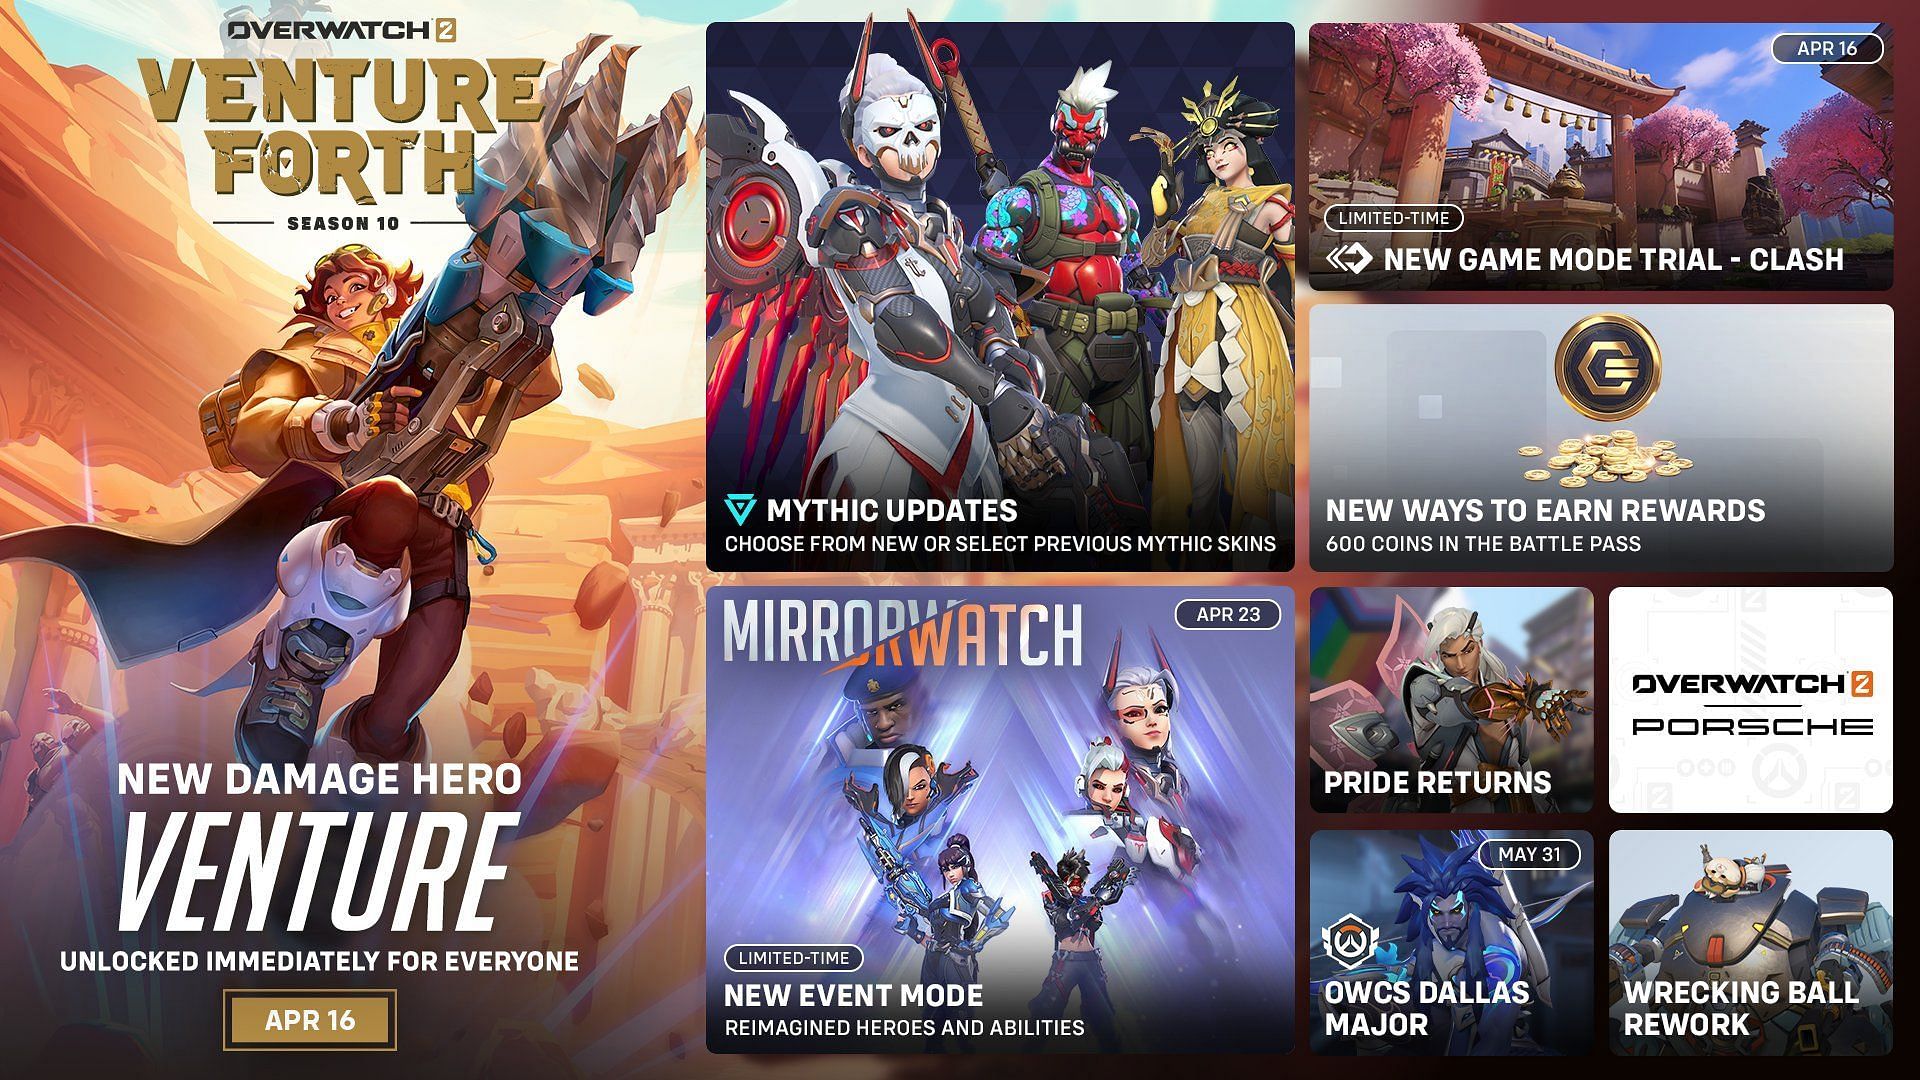 Overwatch 2 Season 10 is now available for pre-download.